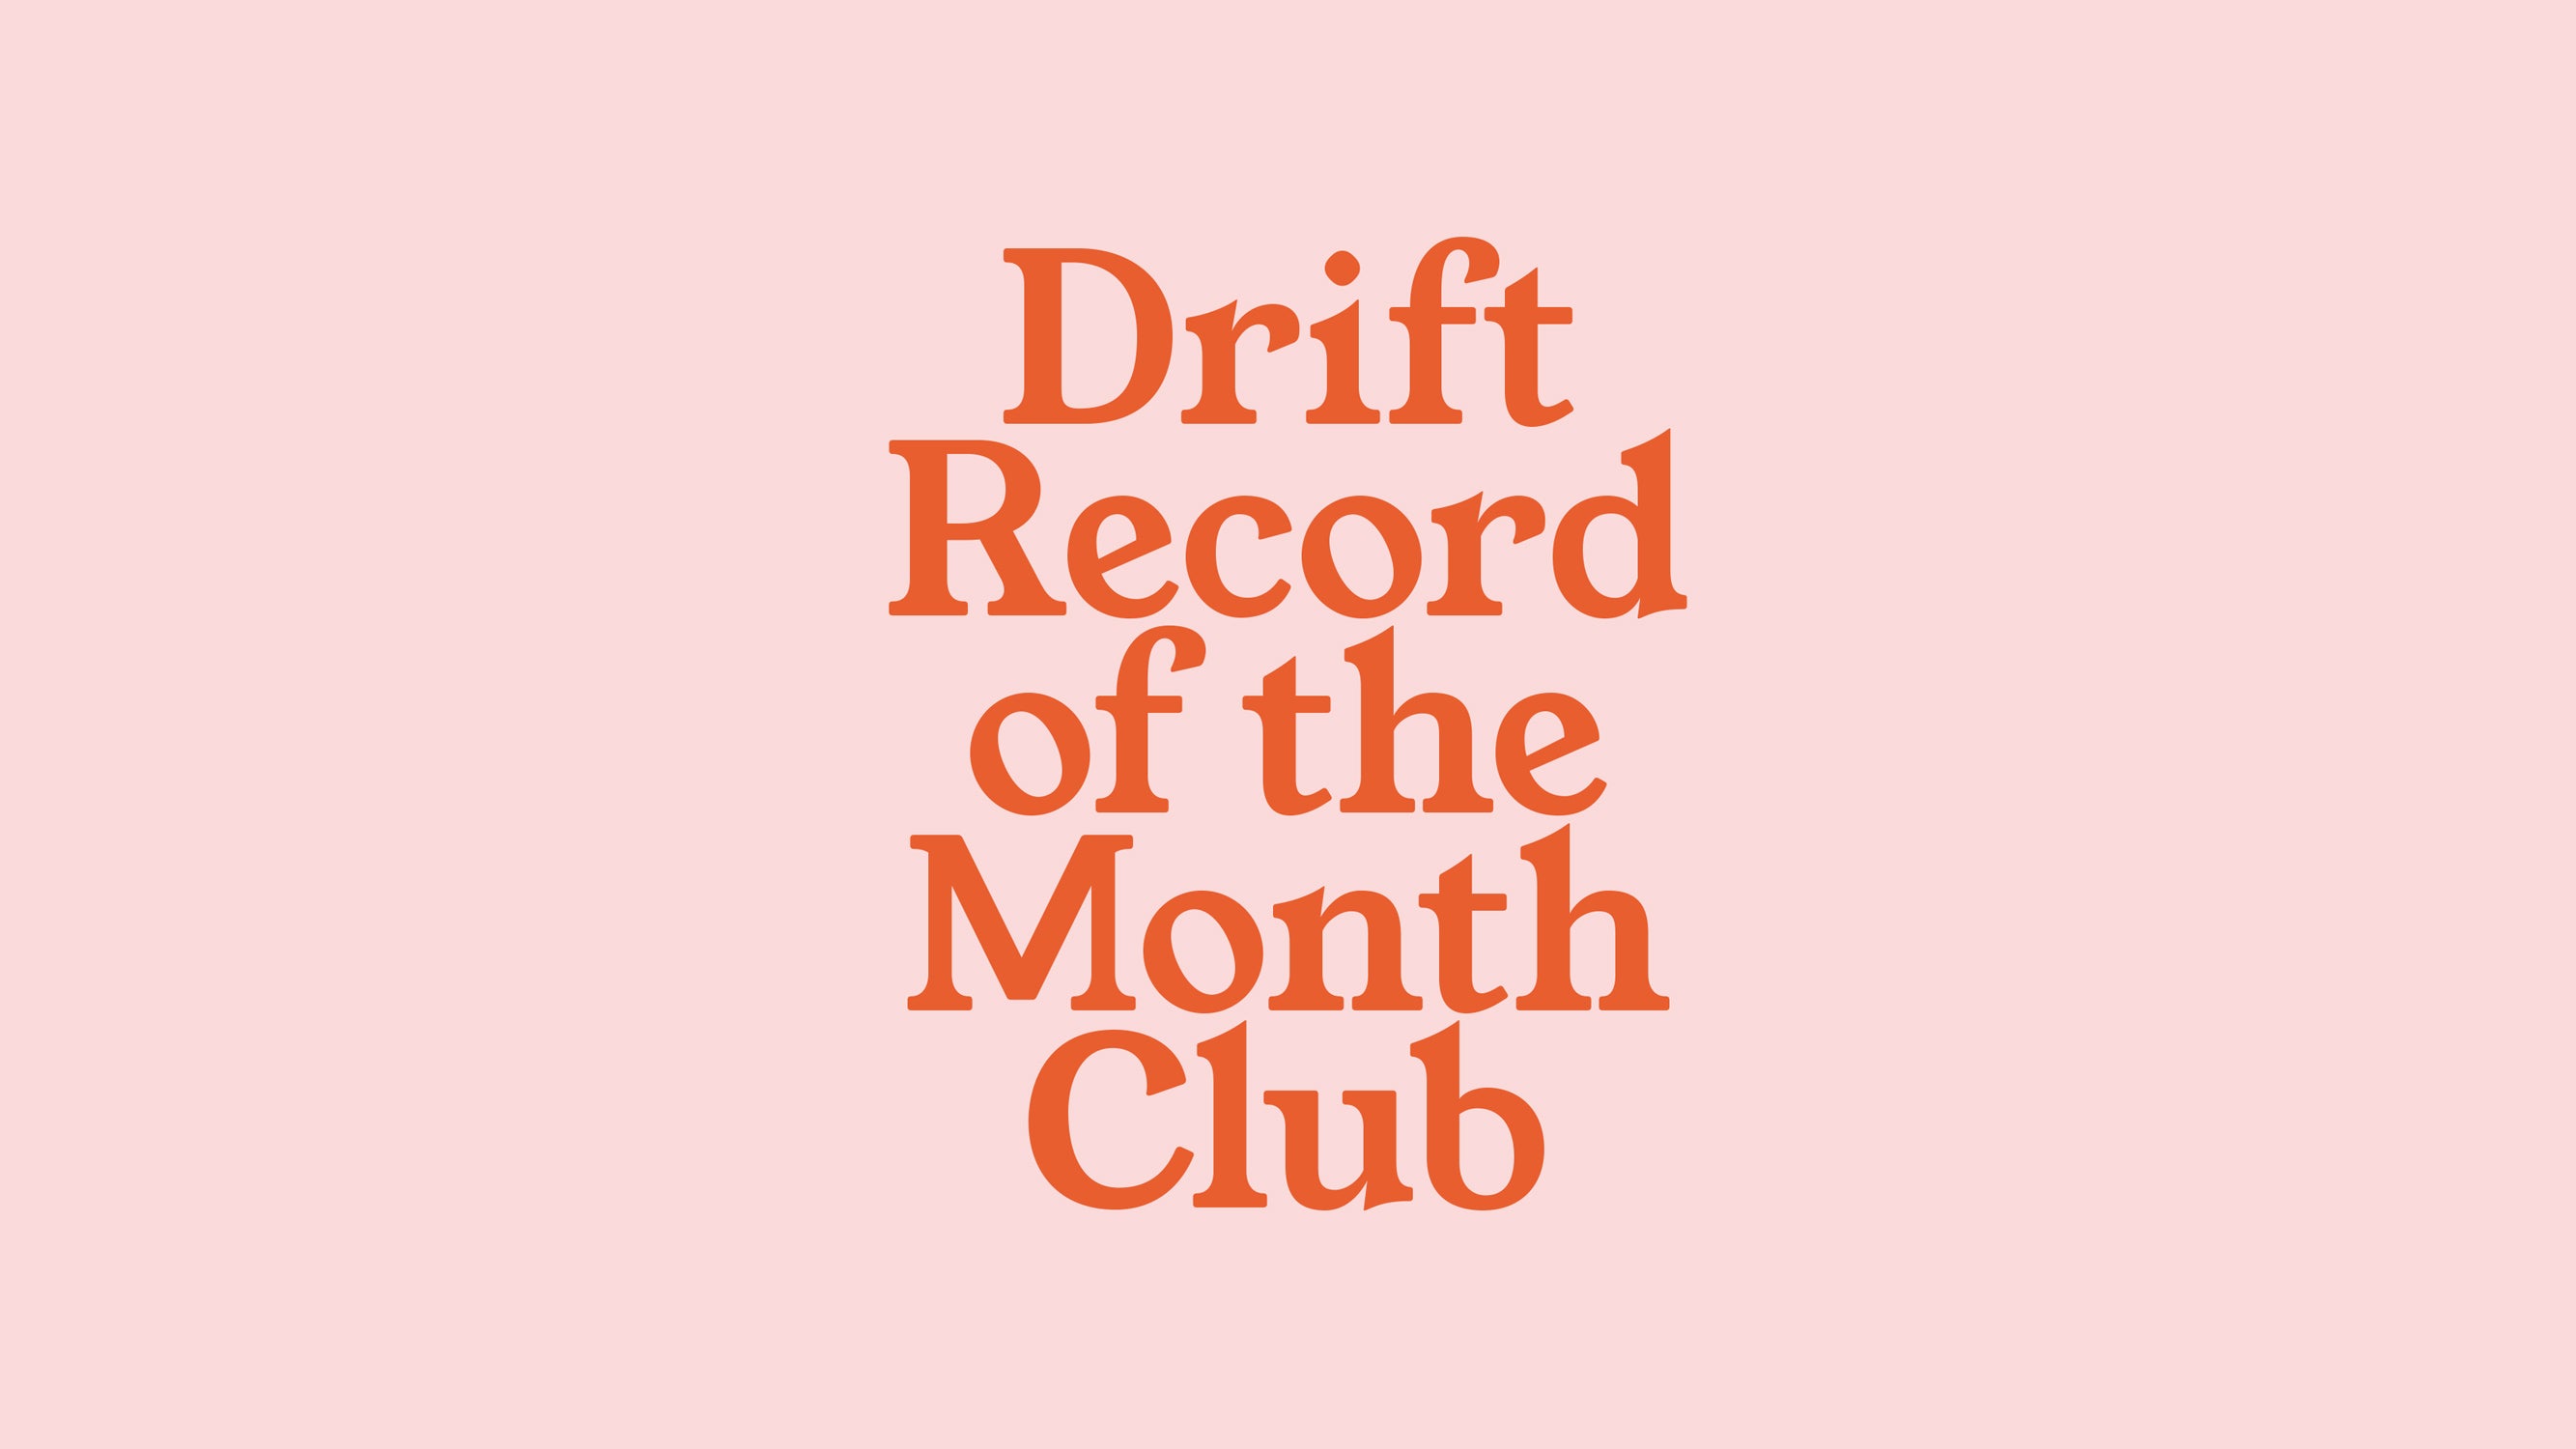 Join the Drift Record of the Month Club